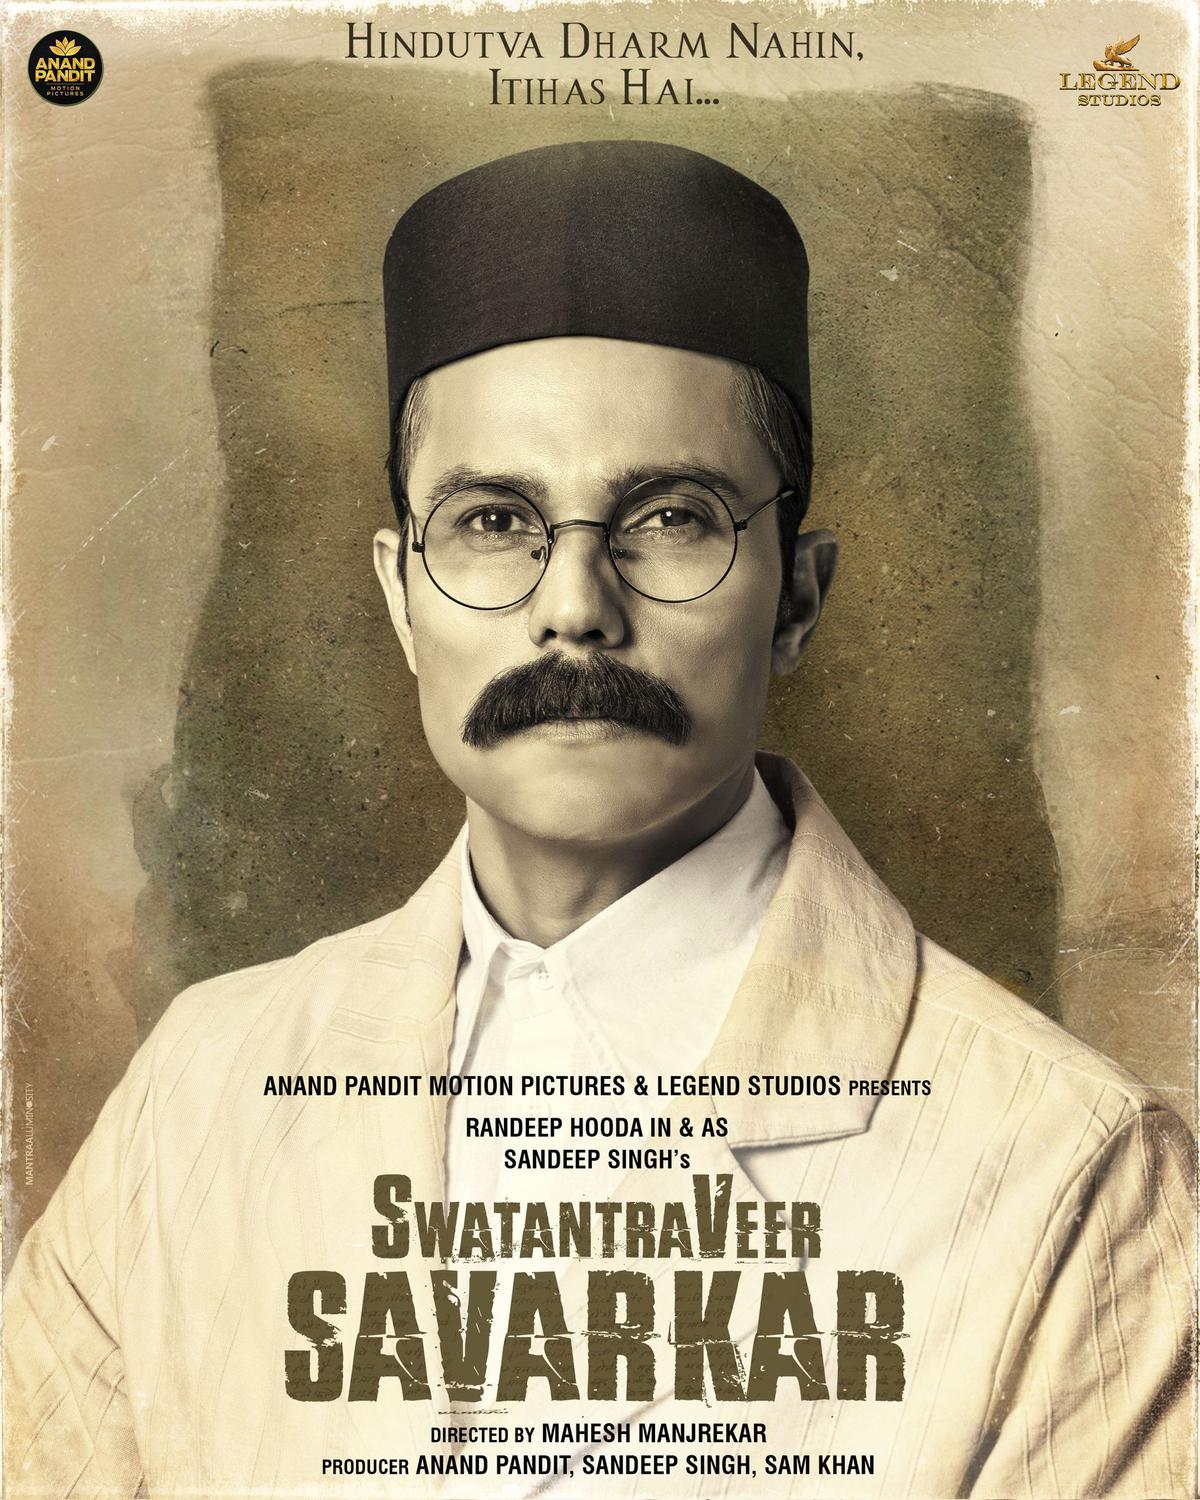 Savarkar first look is out, film on Godse next - The Hindu